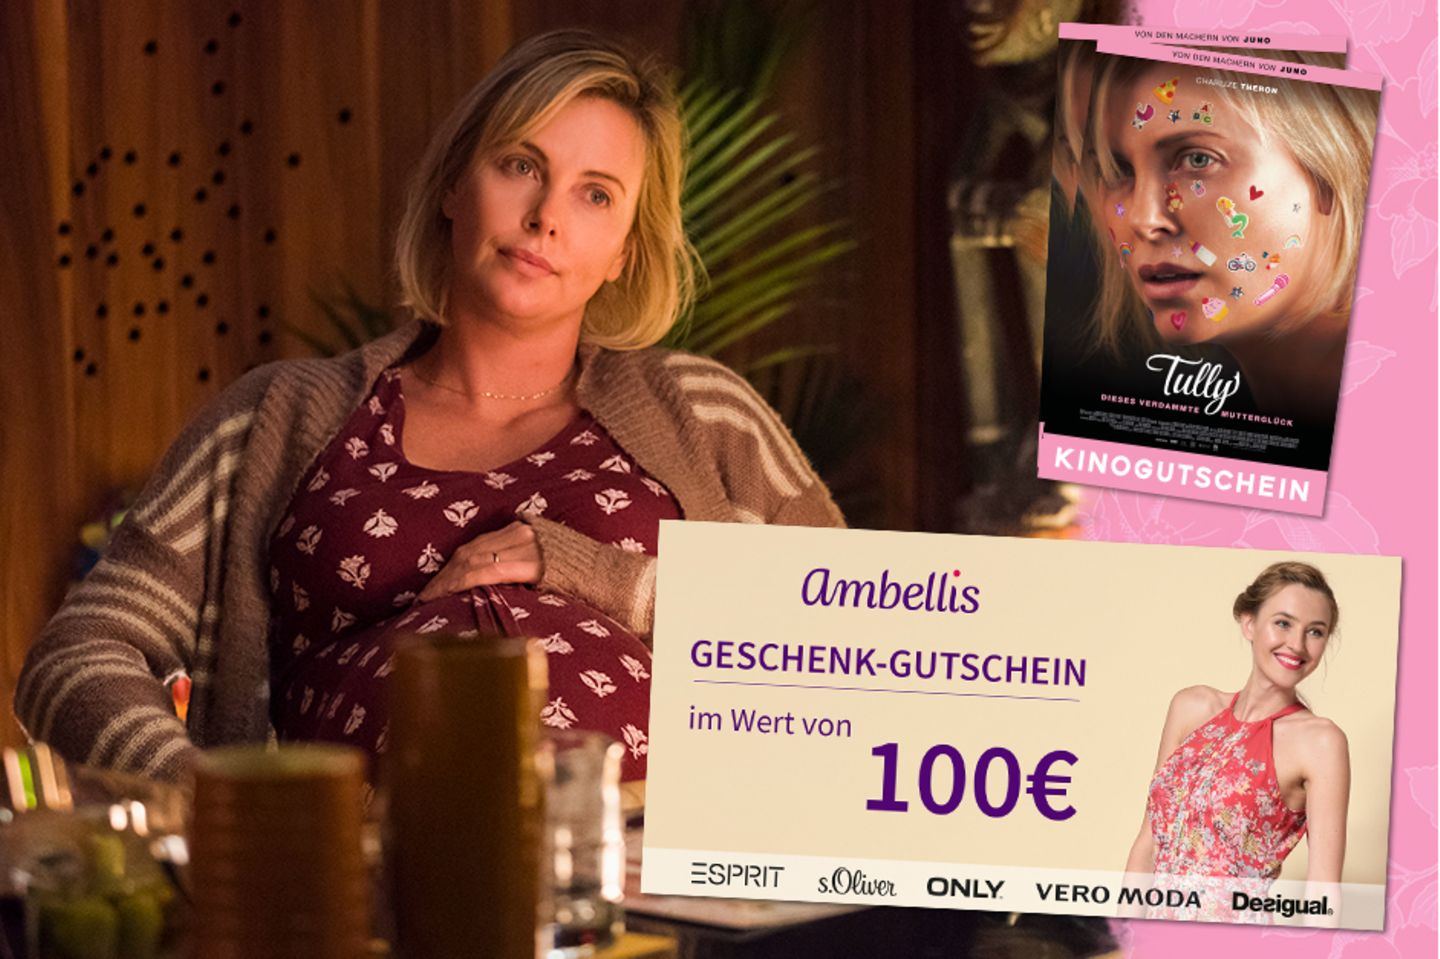 Charlize Theron in "Tully"